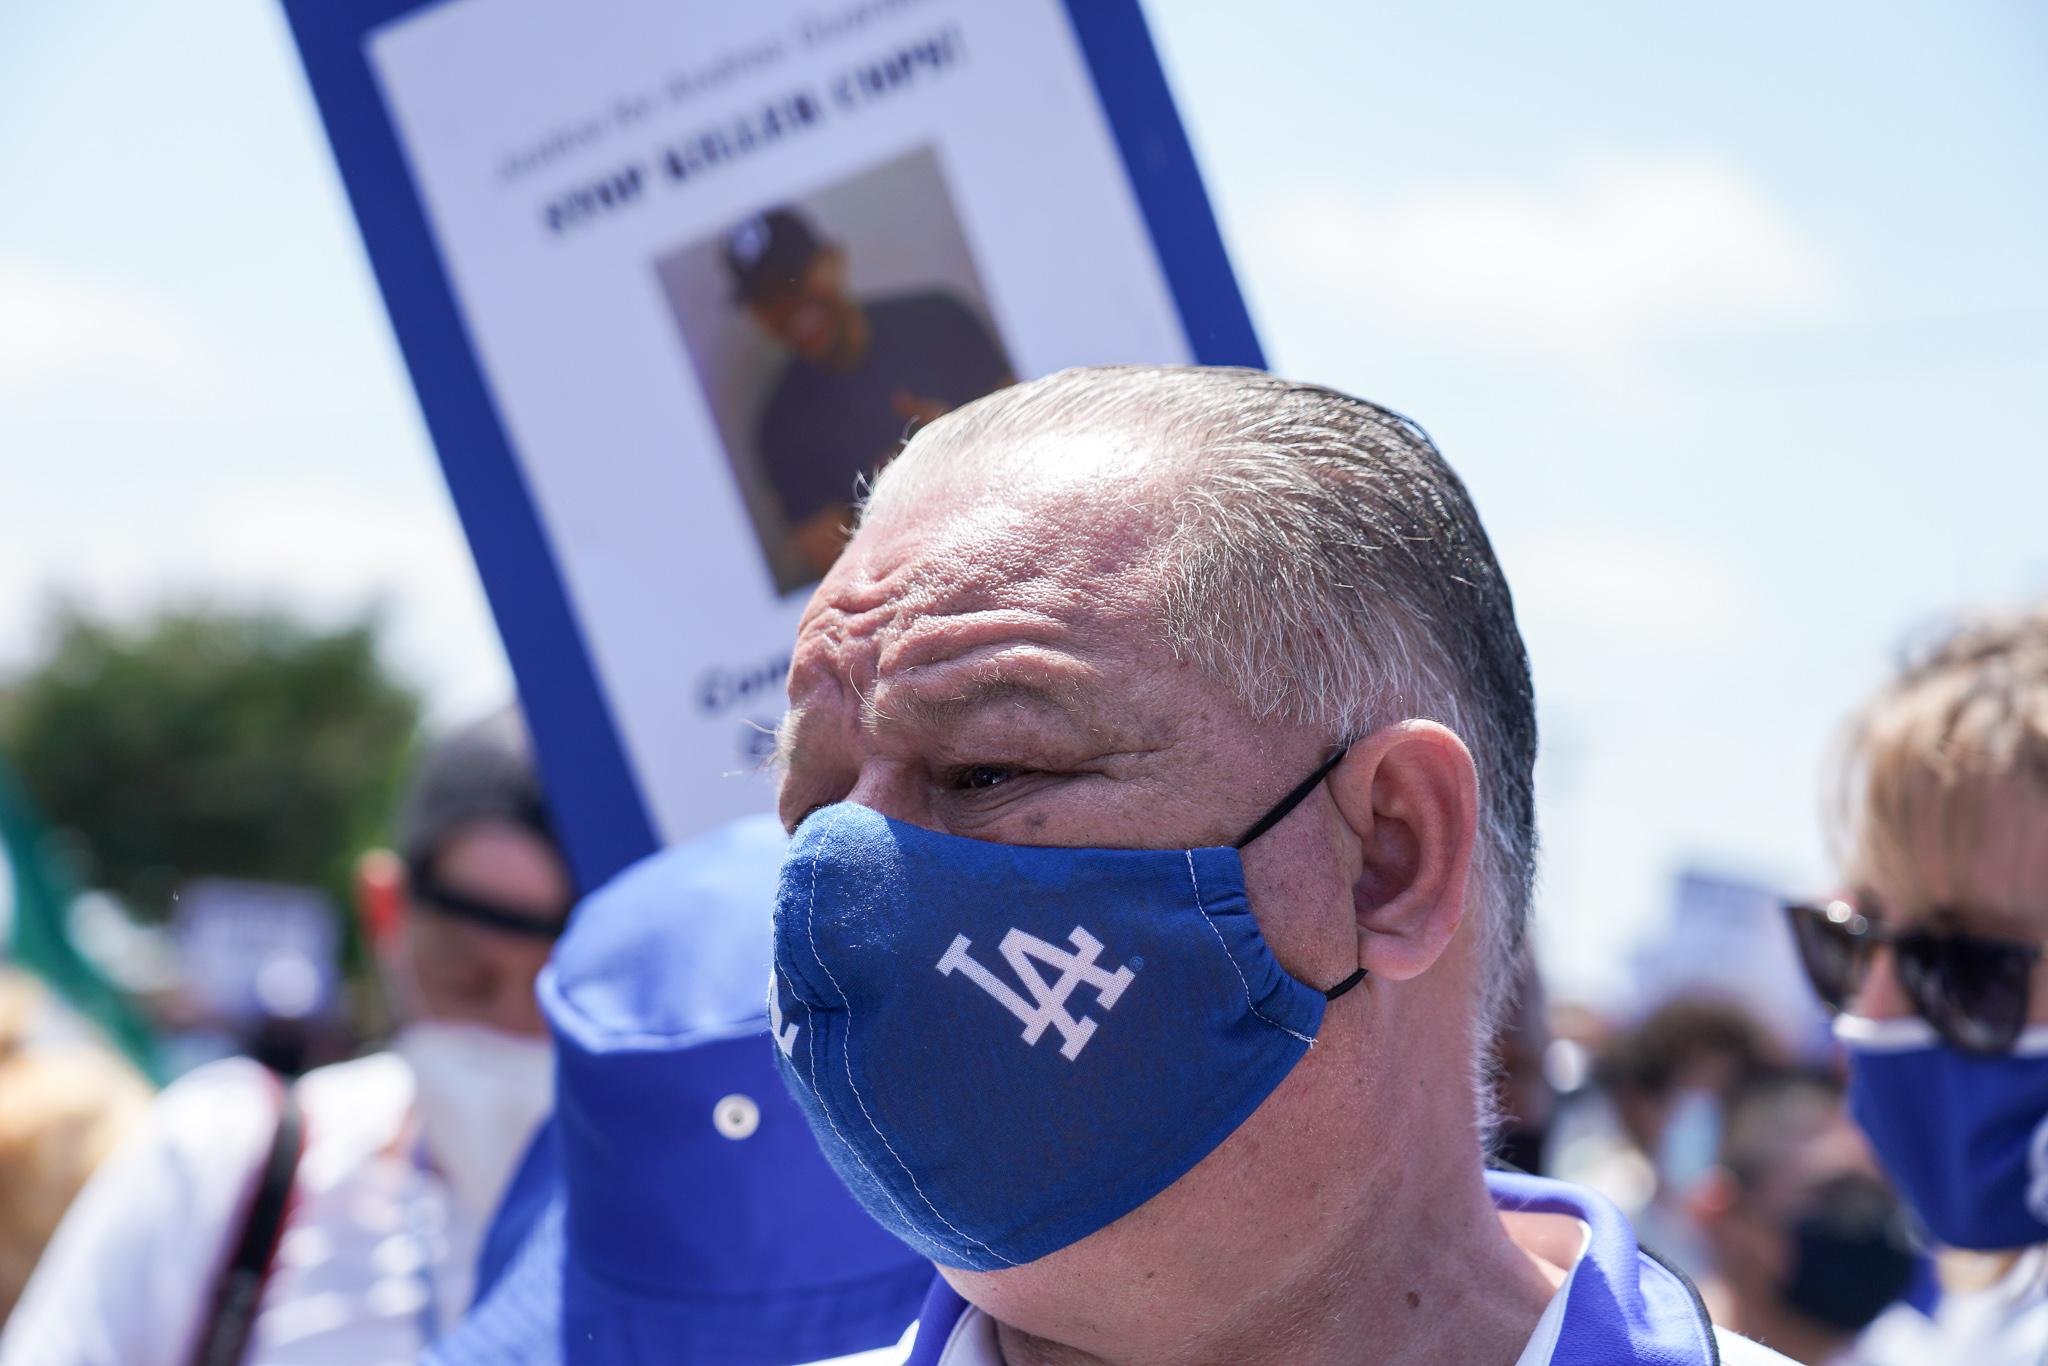 Cristobal Guardado, father of Andres Guardado, at the march and rally wearing an LA Dodgers mask, Andres